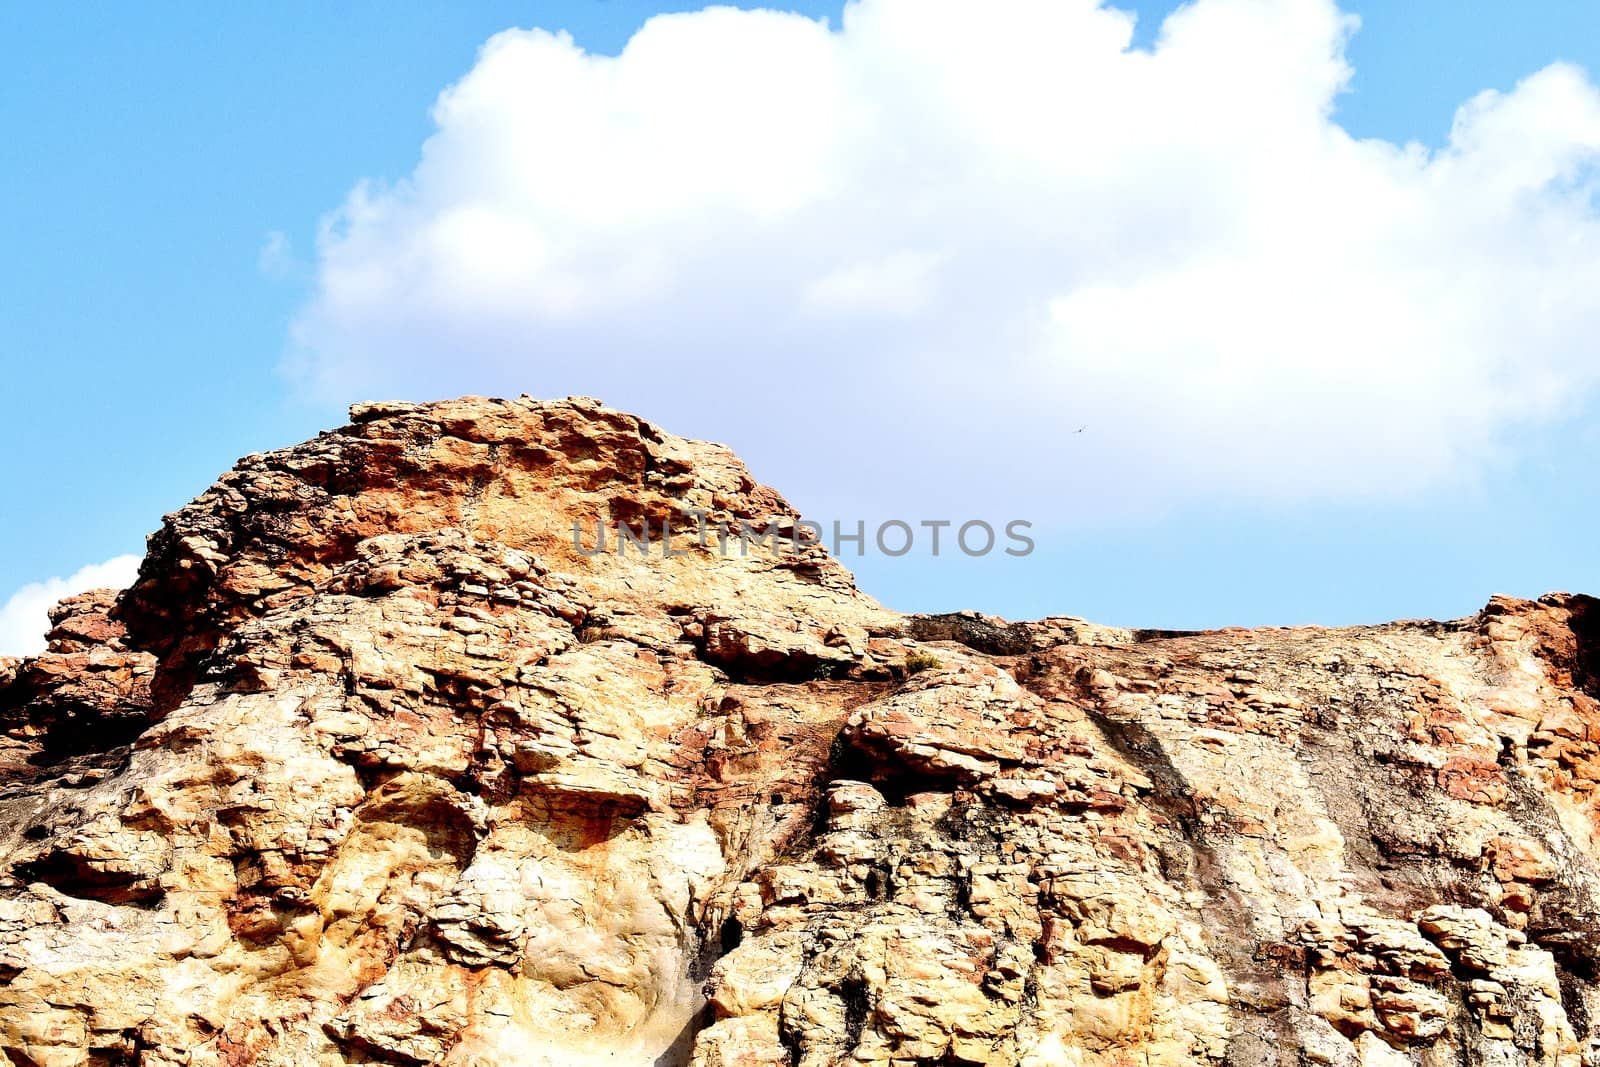 Beauty of Nature - Hill and rocks by ravindrabhu165165@gmail.com